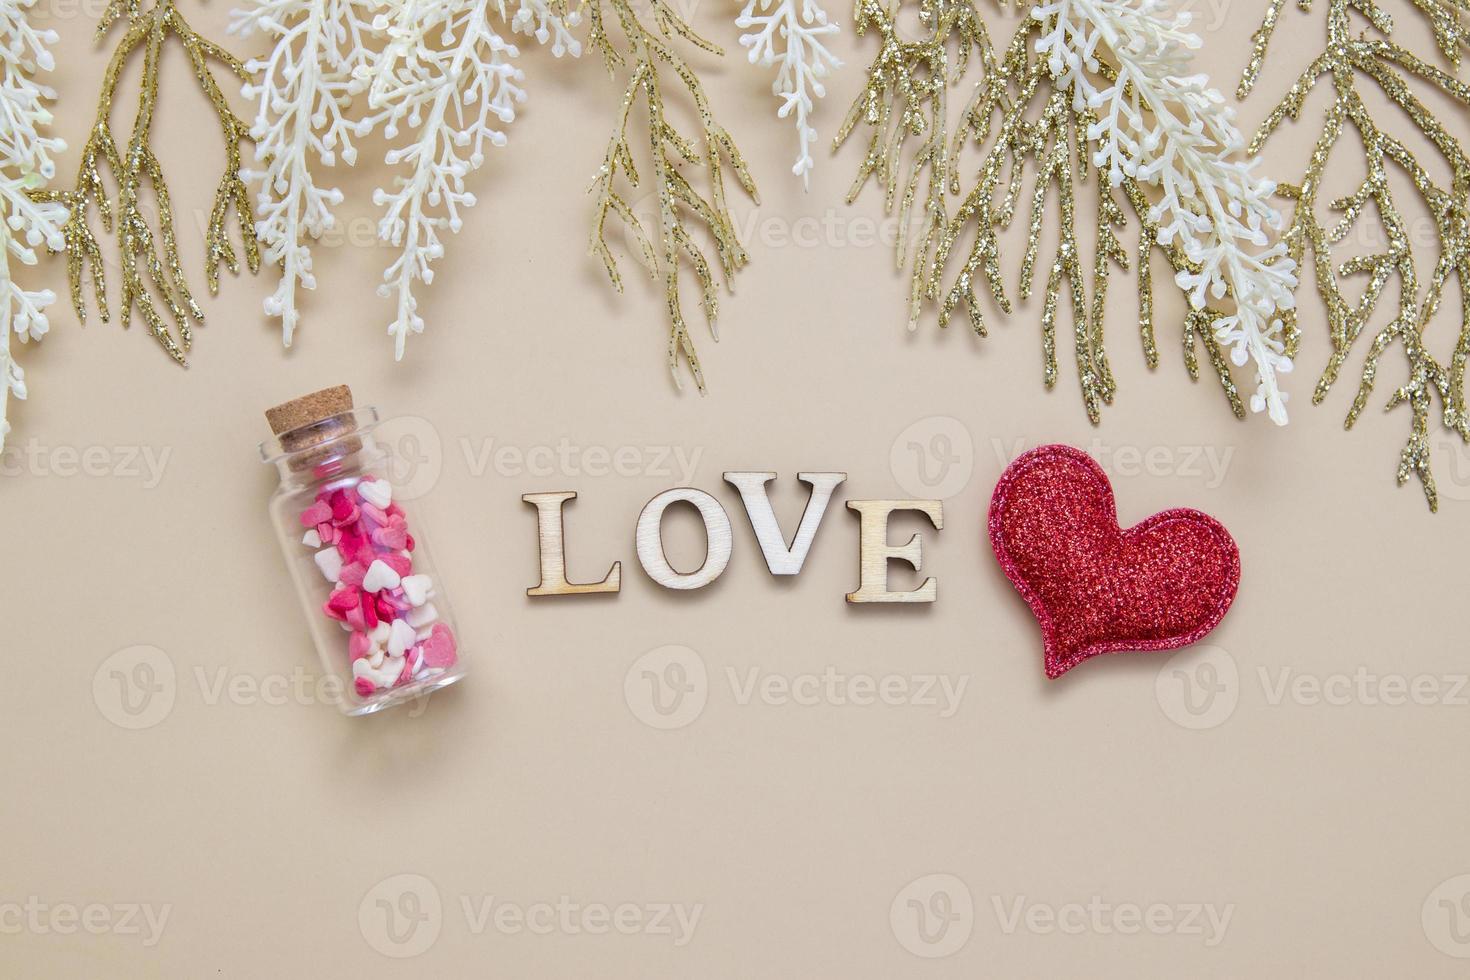 word love wooden letters with red heart and bottle. Creative love concept photo